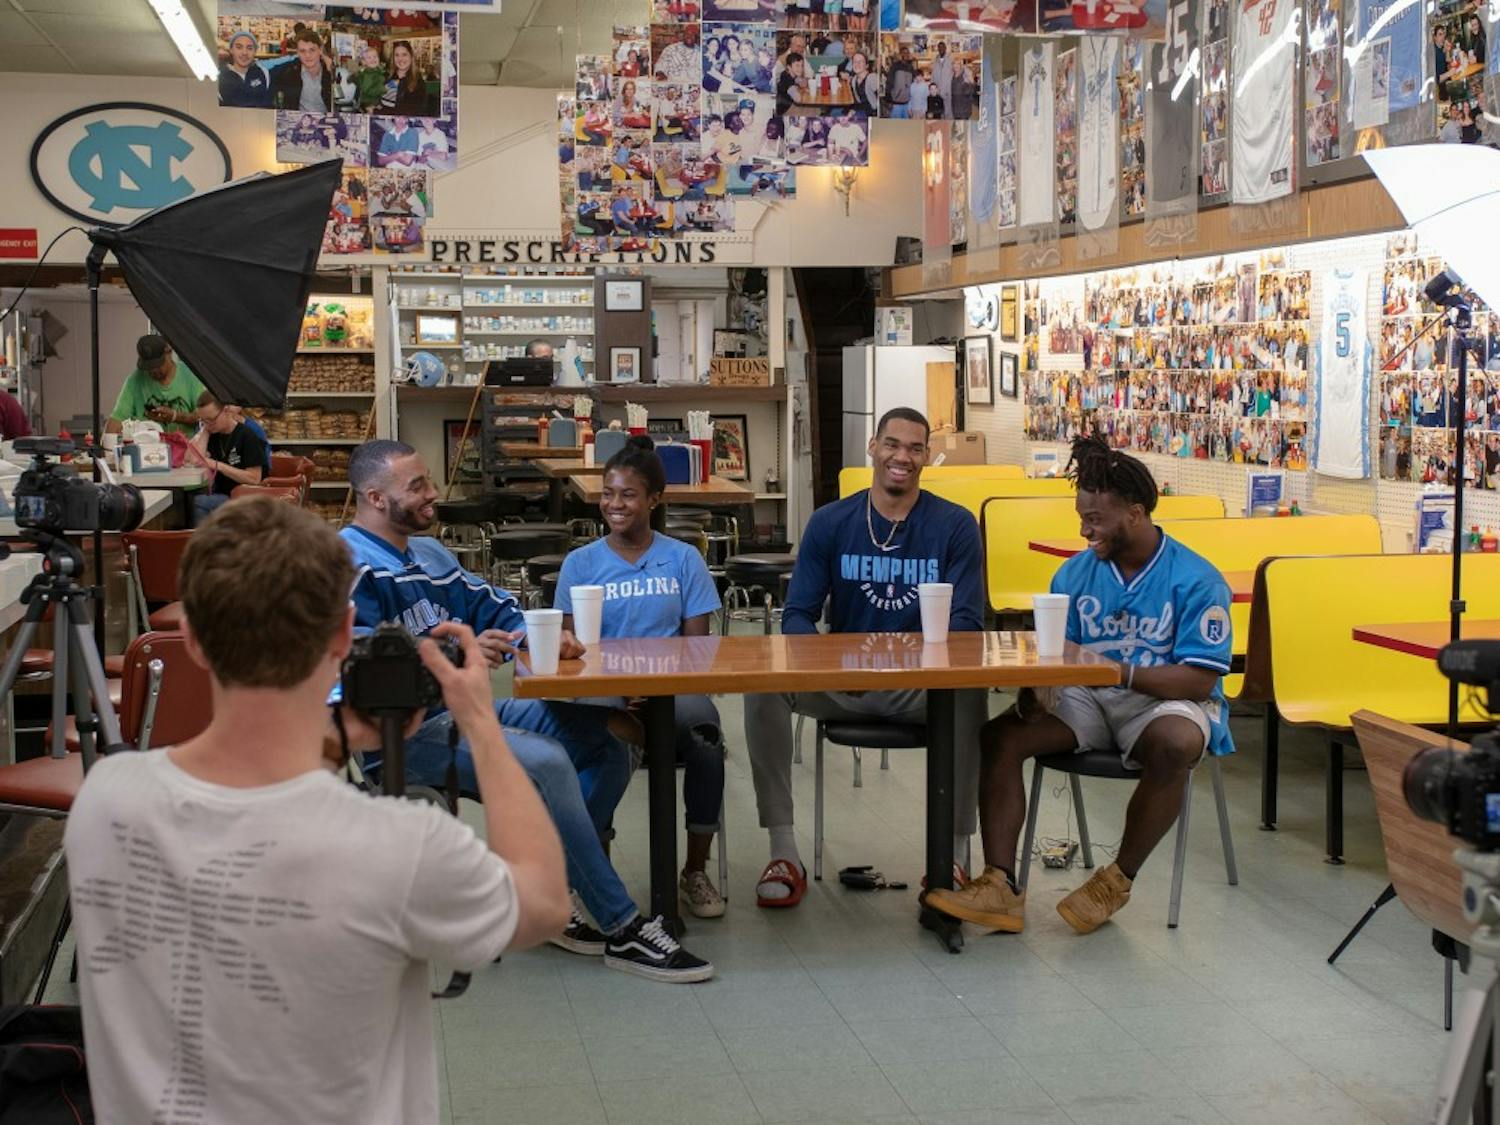 Sophomore Luke Buxton films as (from left to right) Jake Lawler, Brianna Pinto, Garrison Brooks and Michael Carter talk about life as black student-athletes at UNC for the student-produced show UNCUT filmed at Sutton's Drug Store.
Photo courtesy of Kenan Reed.